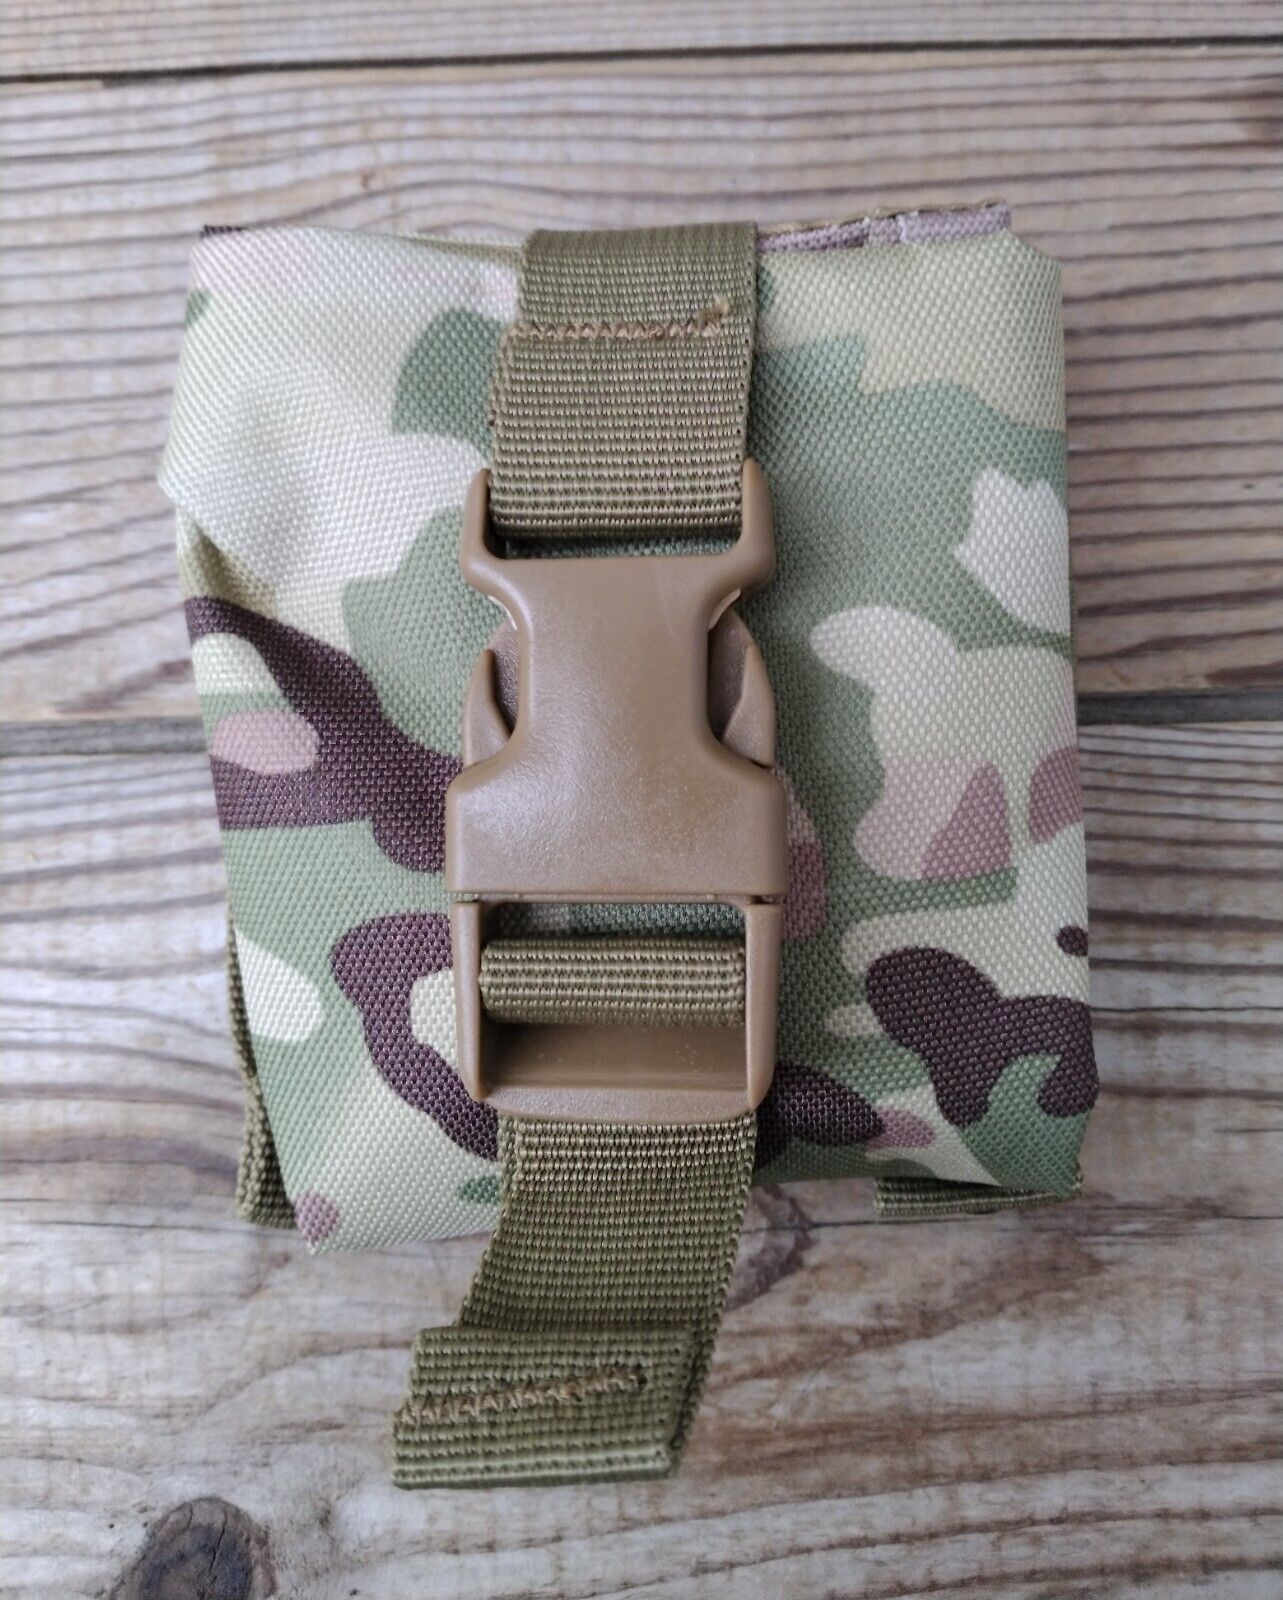 MULTICAM TACTICAL TAILOR STYLE FOLD UP DUMP POUCH MAG RECOVERY BAG MOLLE